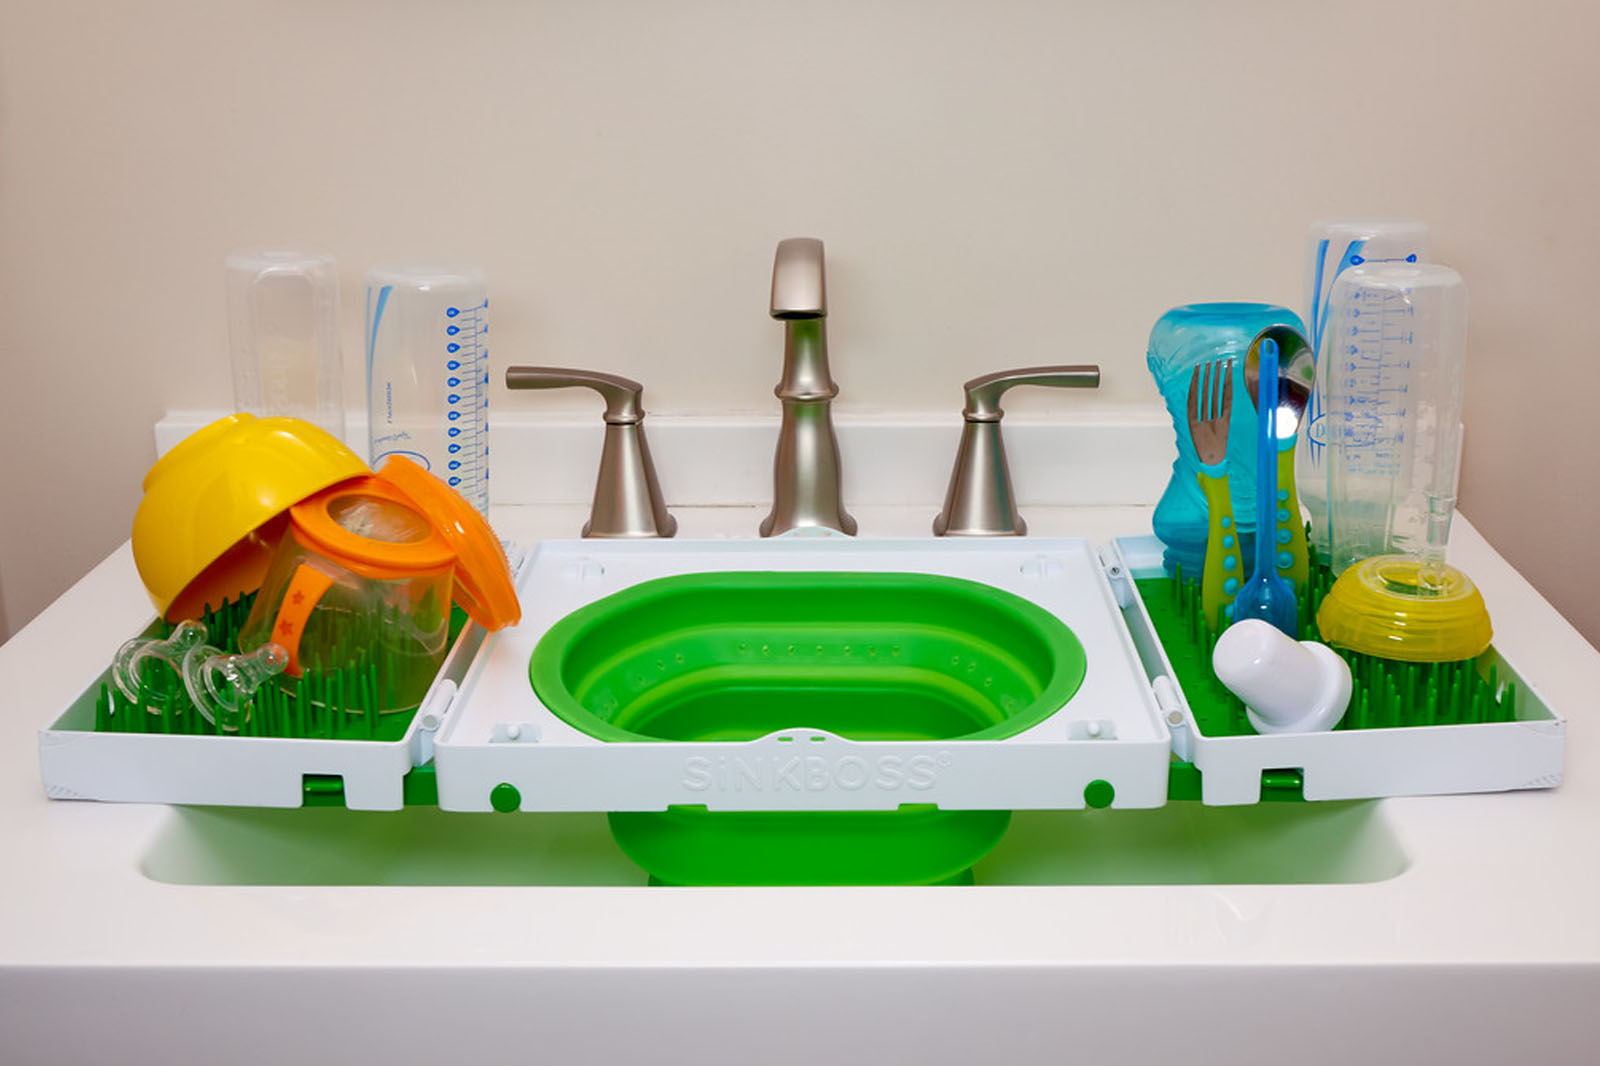 Why You Should Never Wash Your Baby's Kitchenware In a Public Sink